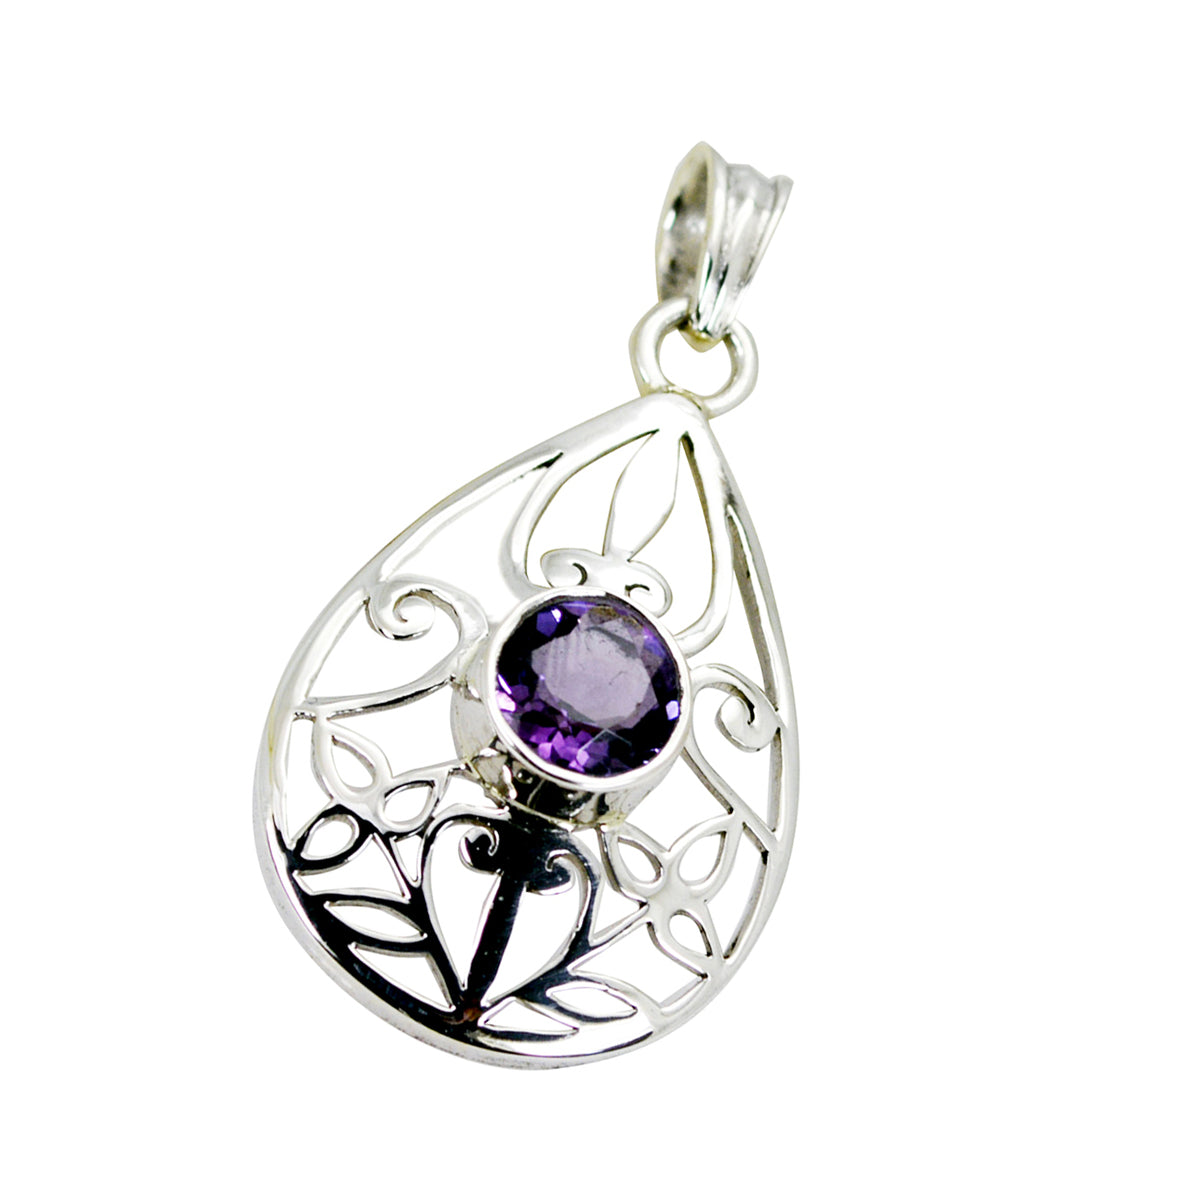 Riyo Charming Gemstone Round Faceted Purple Amethyst 1010 Sterling Silver Pendant Gift For Good Friday